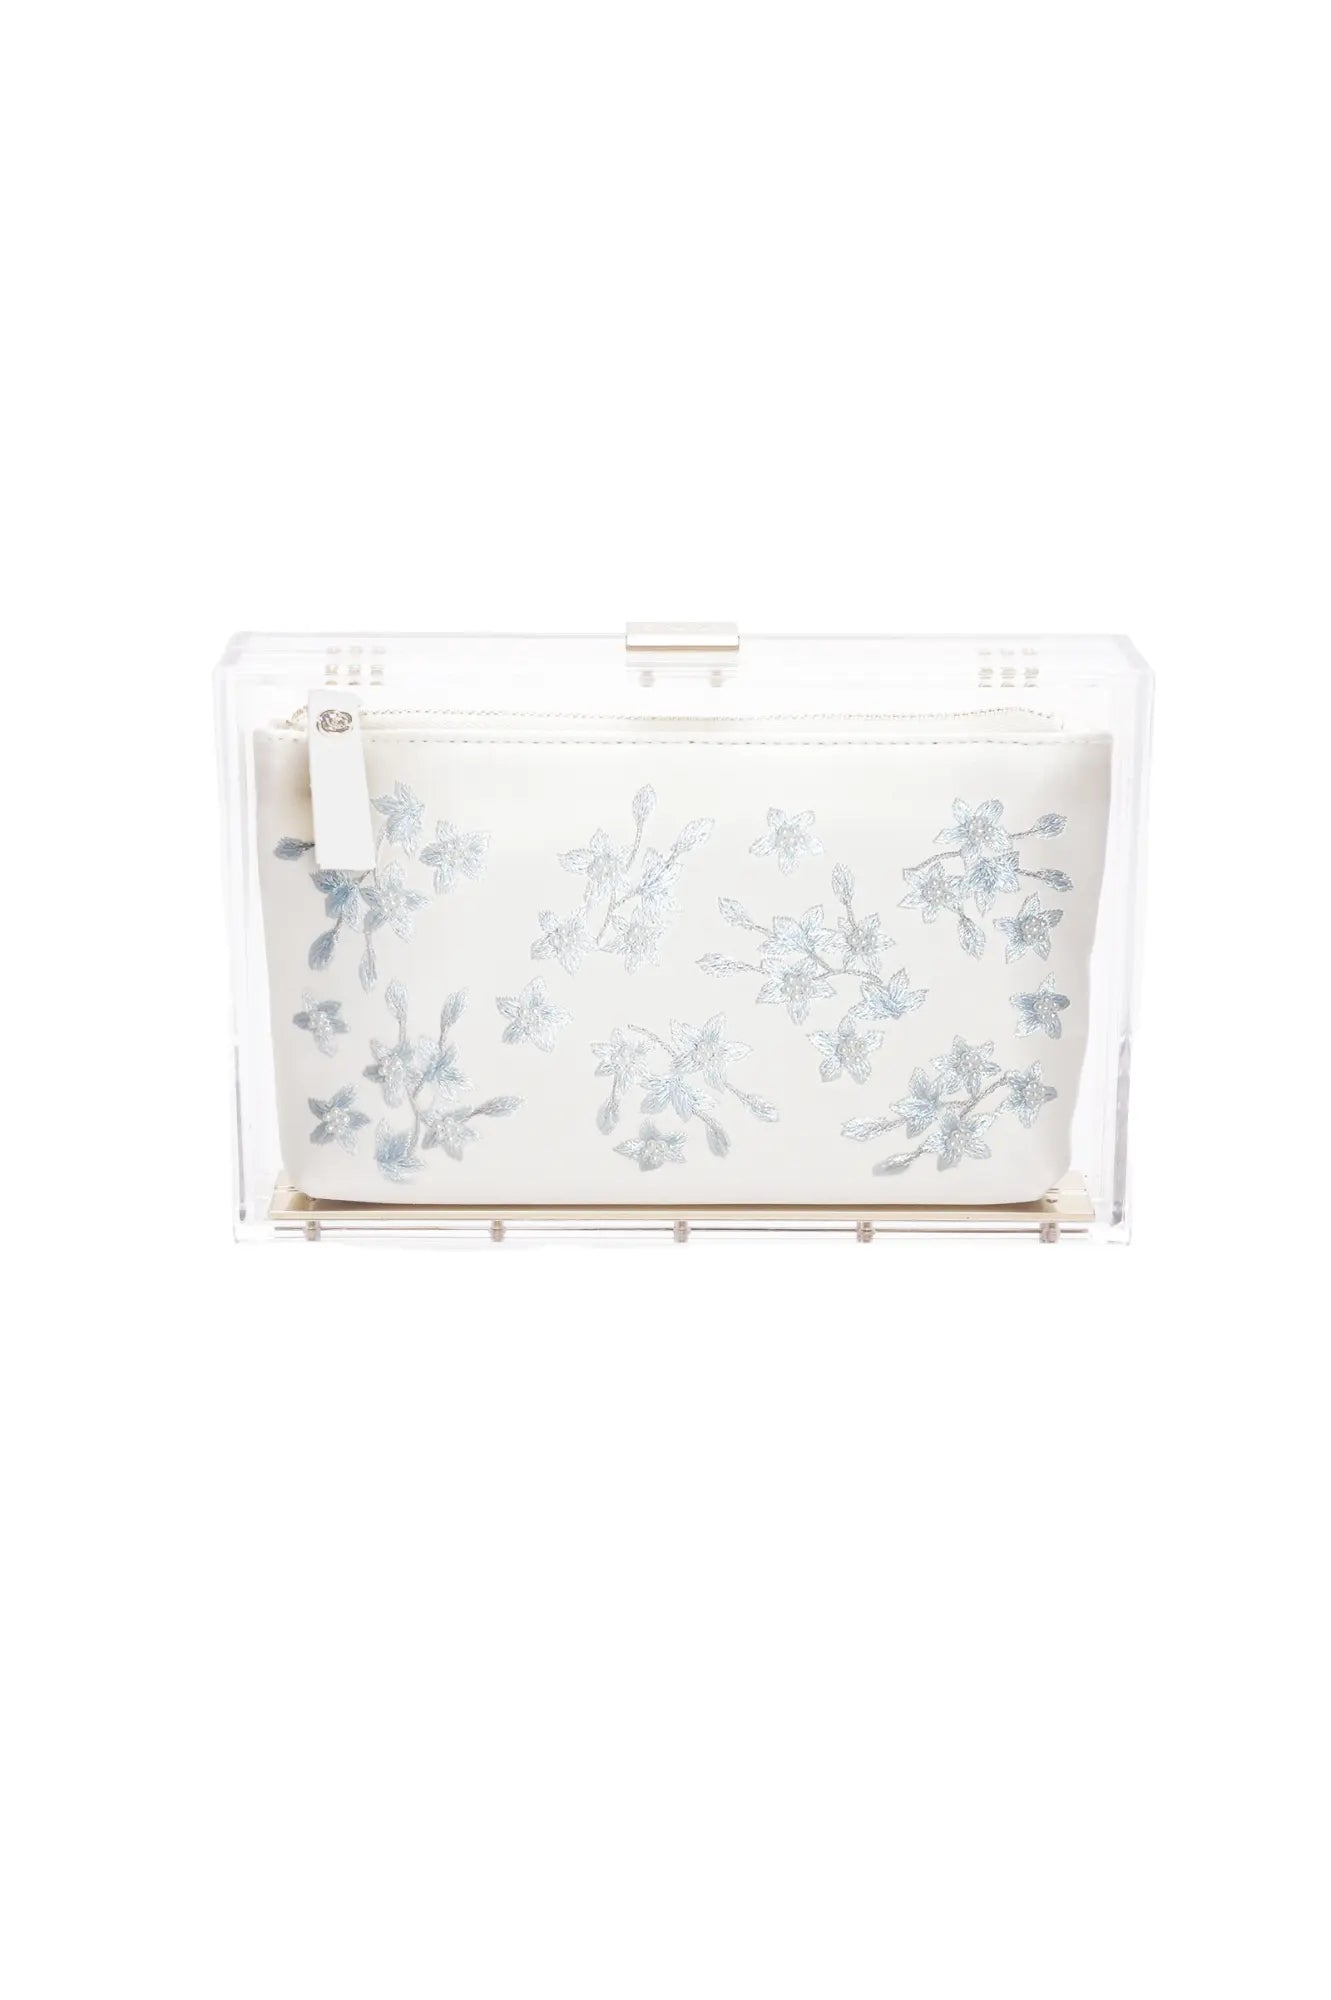 Transparent Mia Acrylic Clutch with Ivory Pouch Blue Flowers from The Bella Rosa Collection.